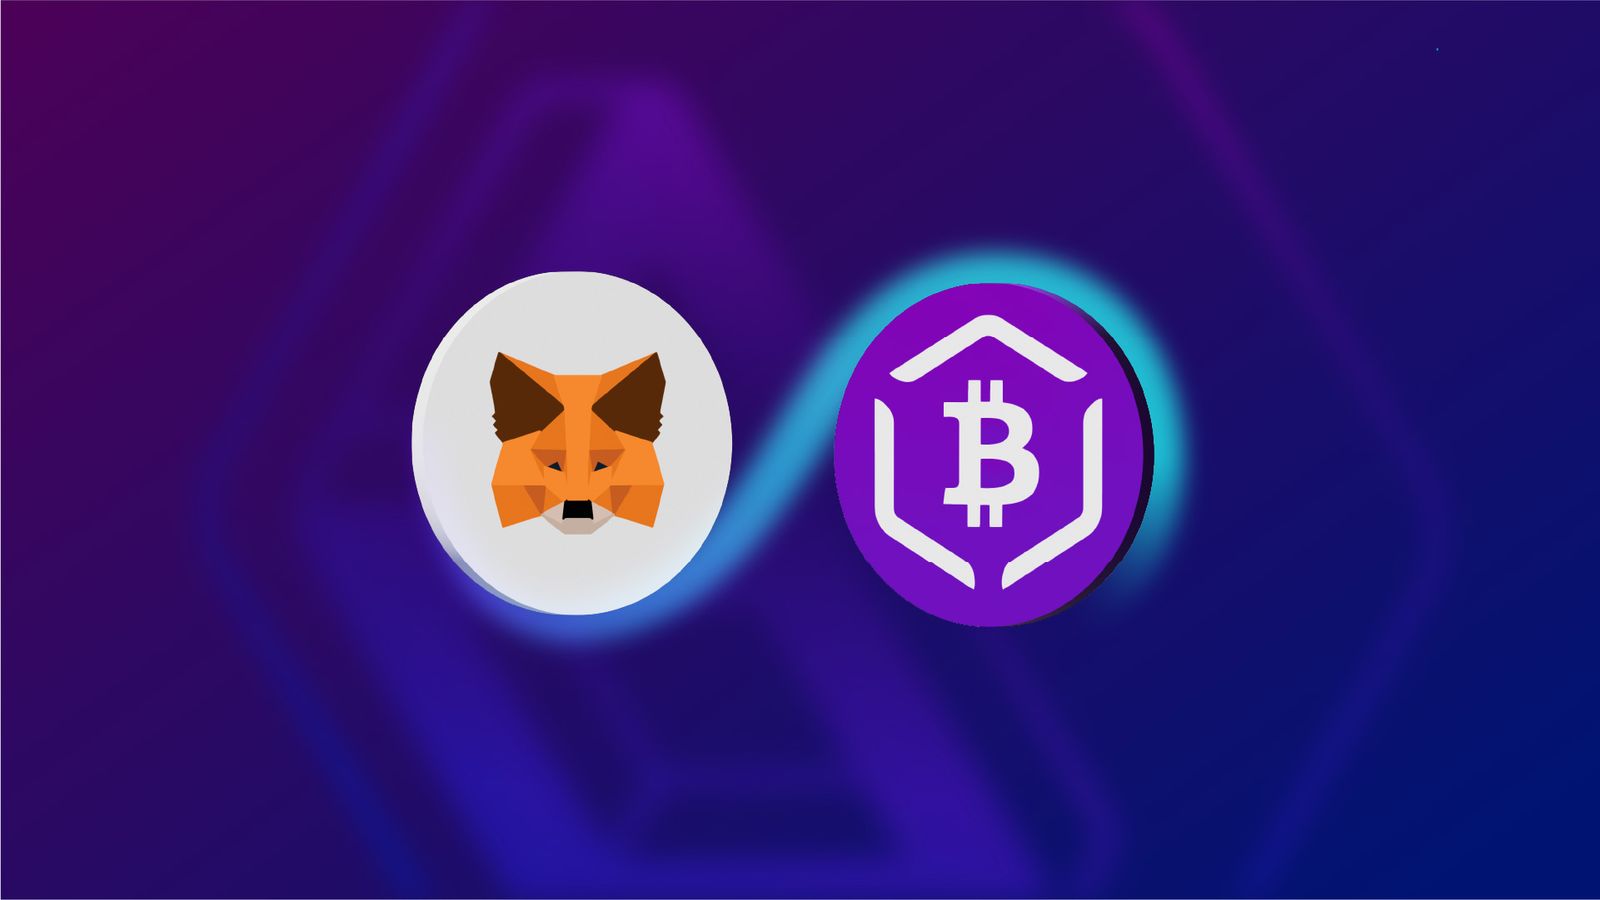 A Step-by-Step Guide on How to Buy dlcBTC on MetaMask